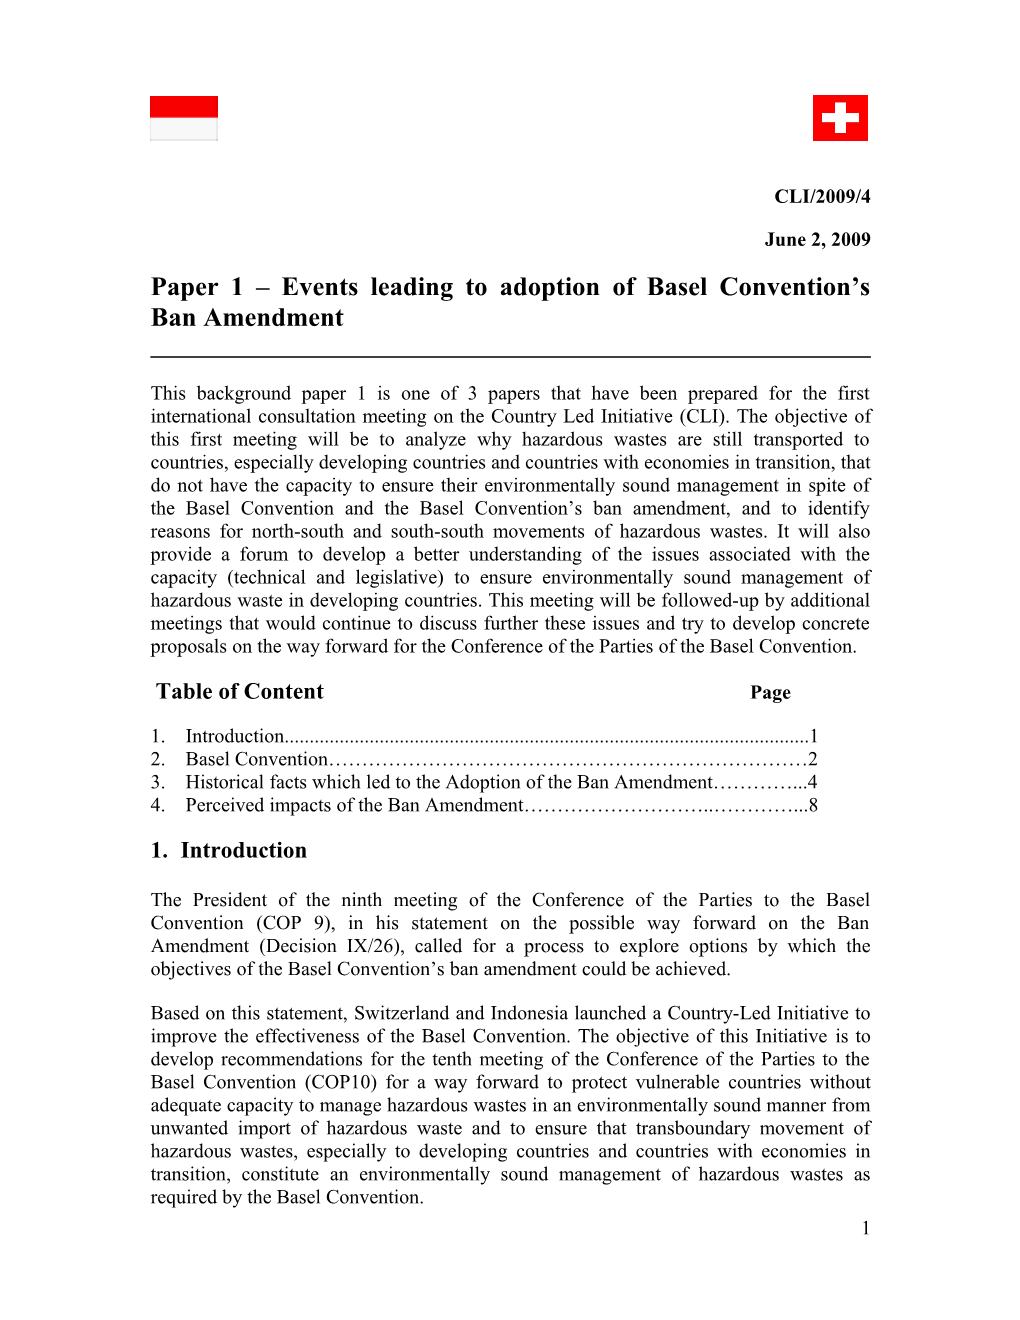 Paper 1 Events Leading to Adoption of Basel Convention S Ban Amendment